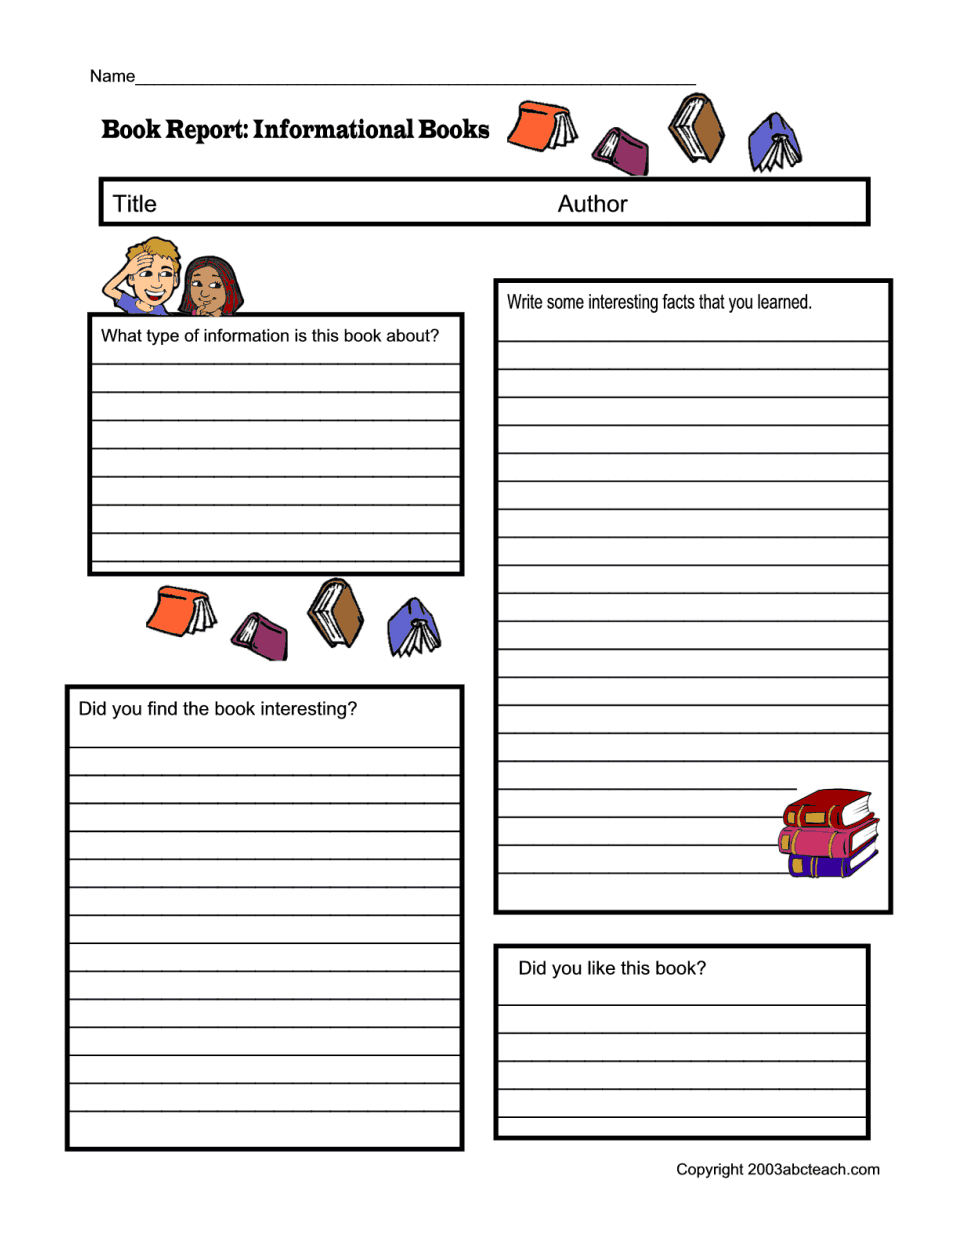 Non Fiction Book Report Form.pdf | Book Report Templates With Regard To Nonfiction Book Report Template